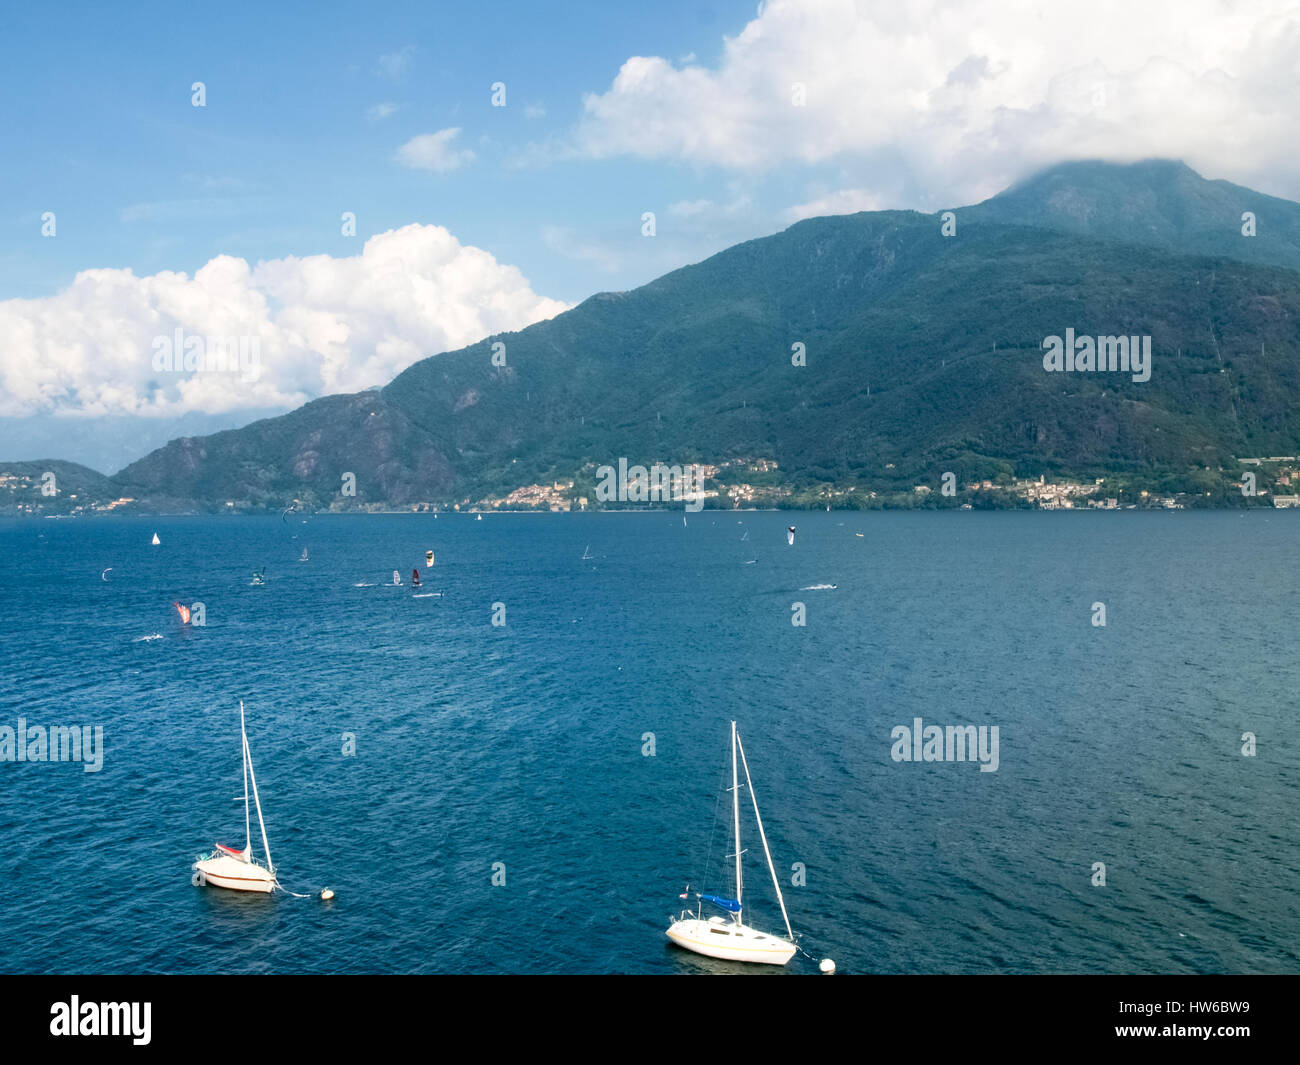 Cremia, Italy - August 25, 2015: Panorama of the village of Cremia directly overlooking Lake Como. Stock Photo